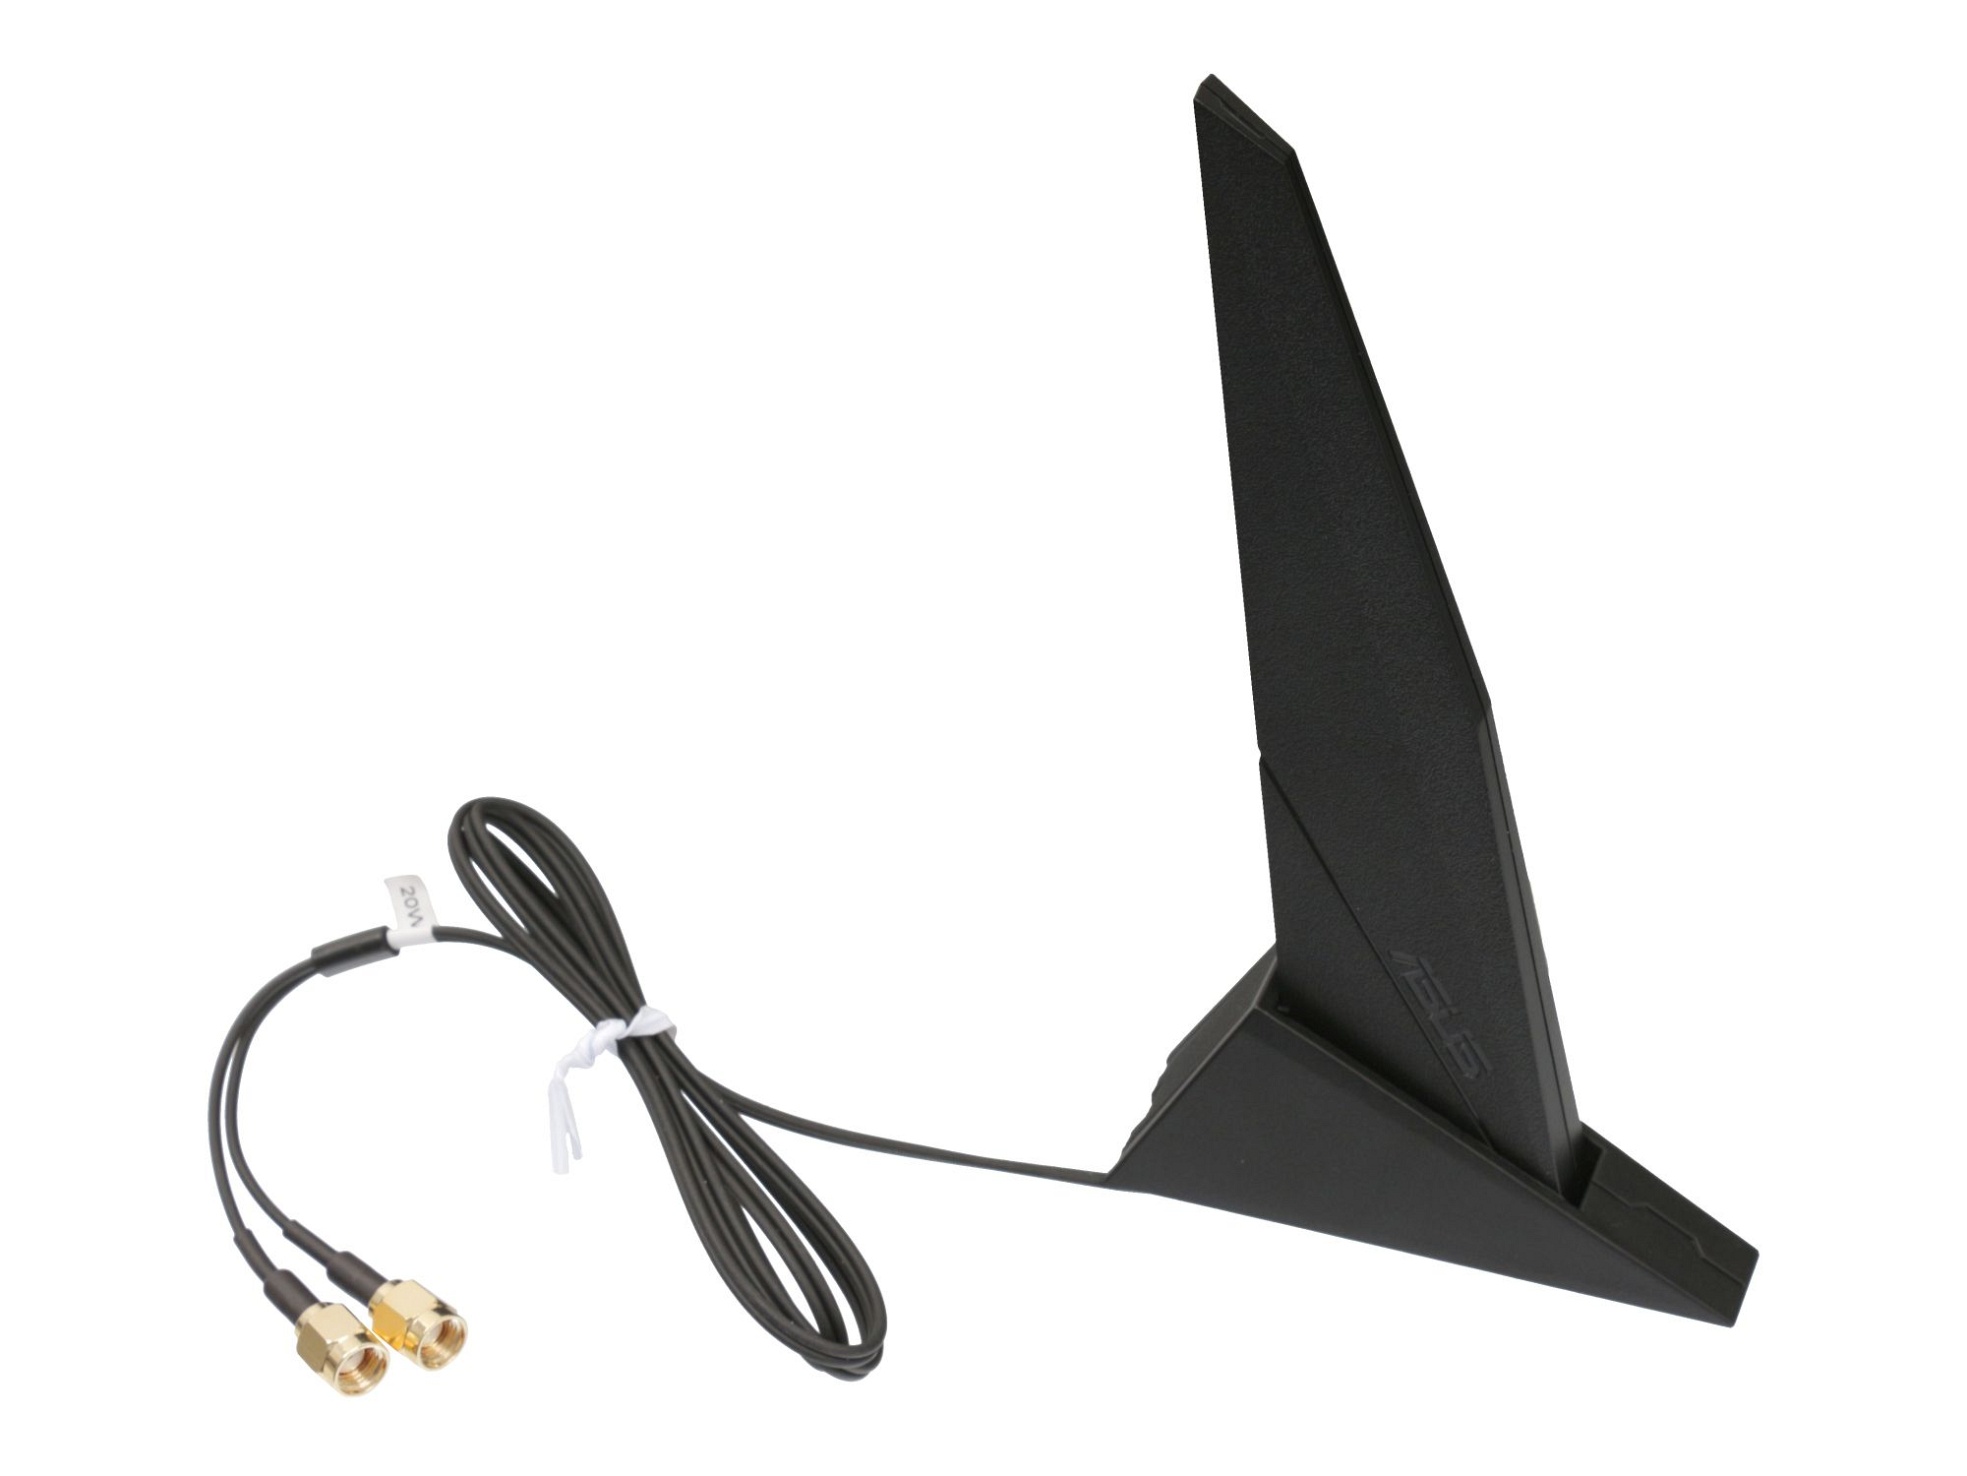 Asus 14008-02650000 Externe Asus RP-SMA DIPOLE Antenne